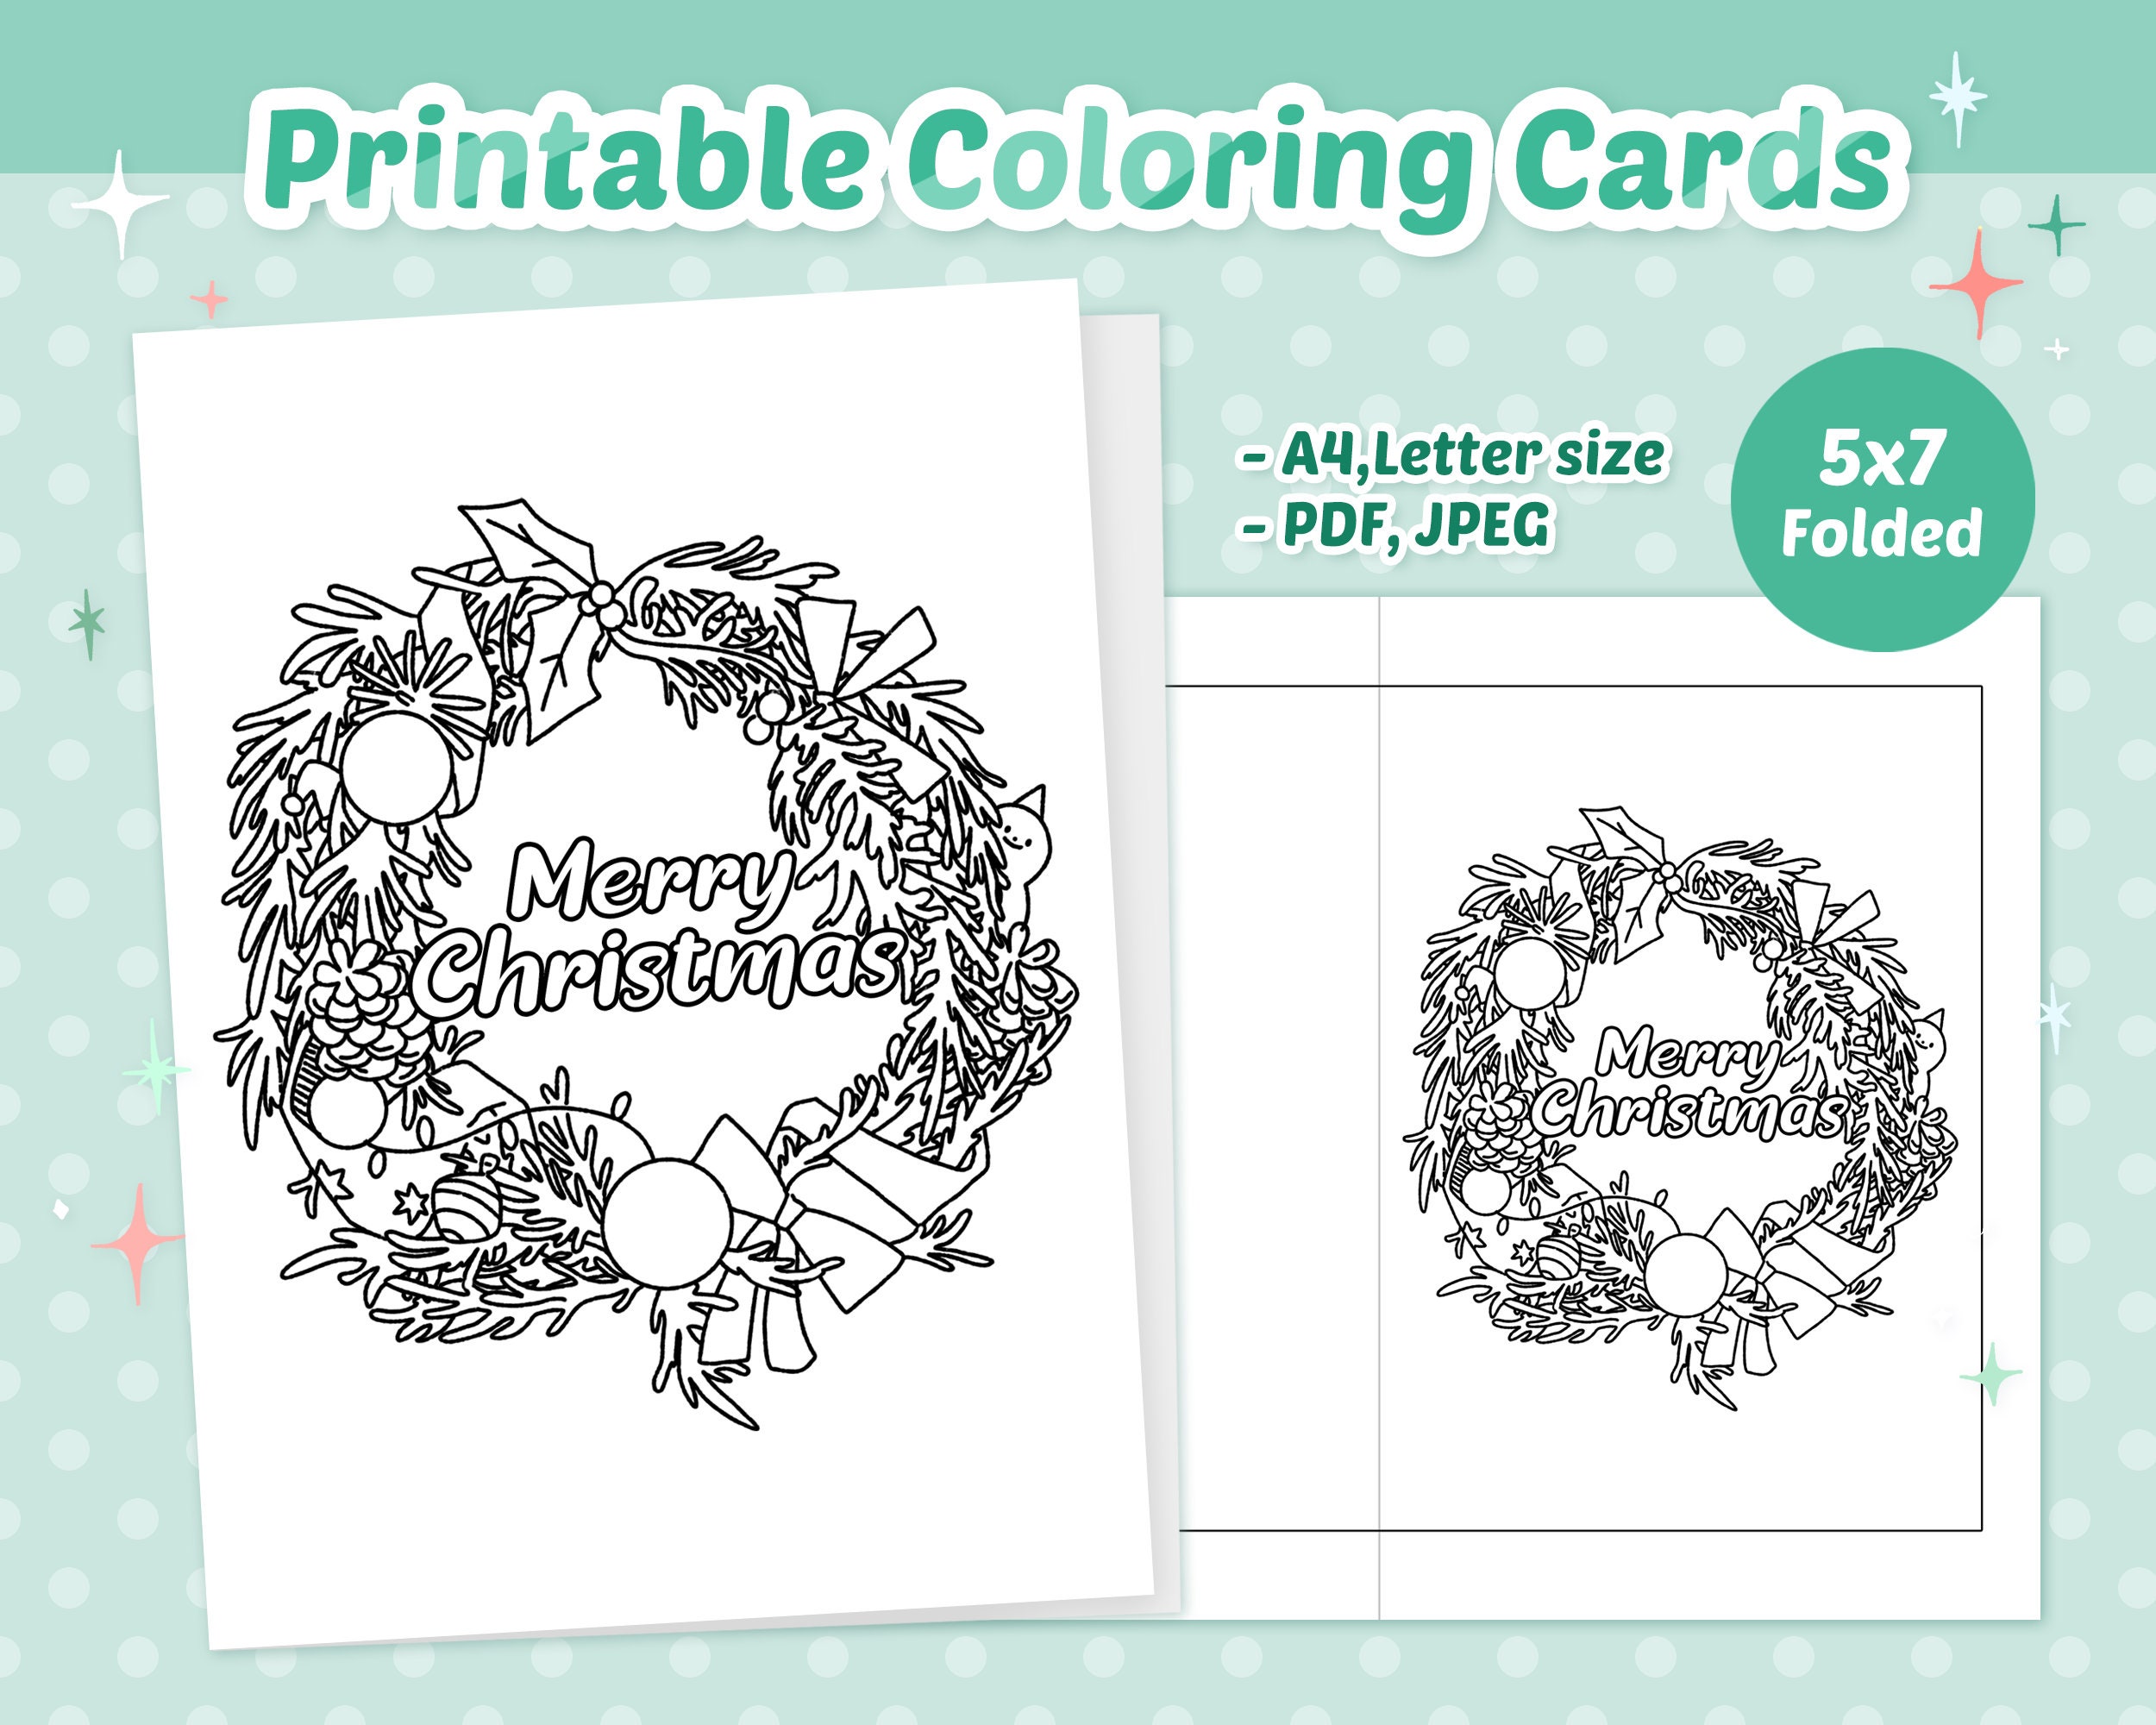 Printable christmas wreath coloring card for kids instant download x card greeting card holiday card diy card download now